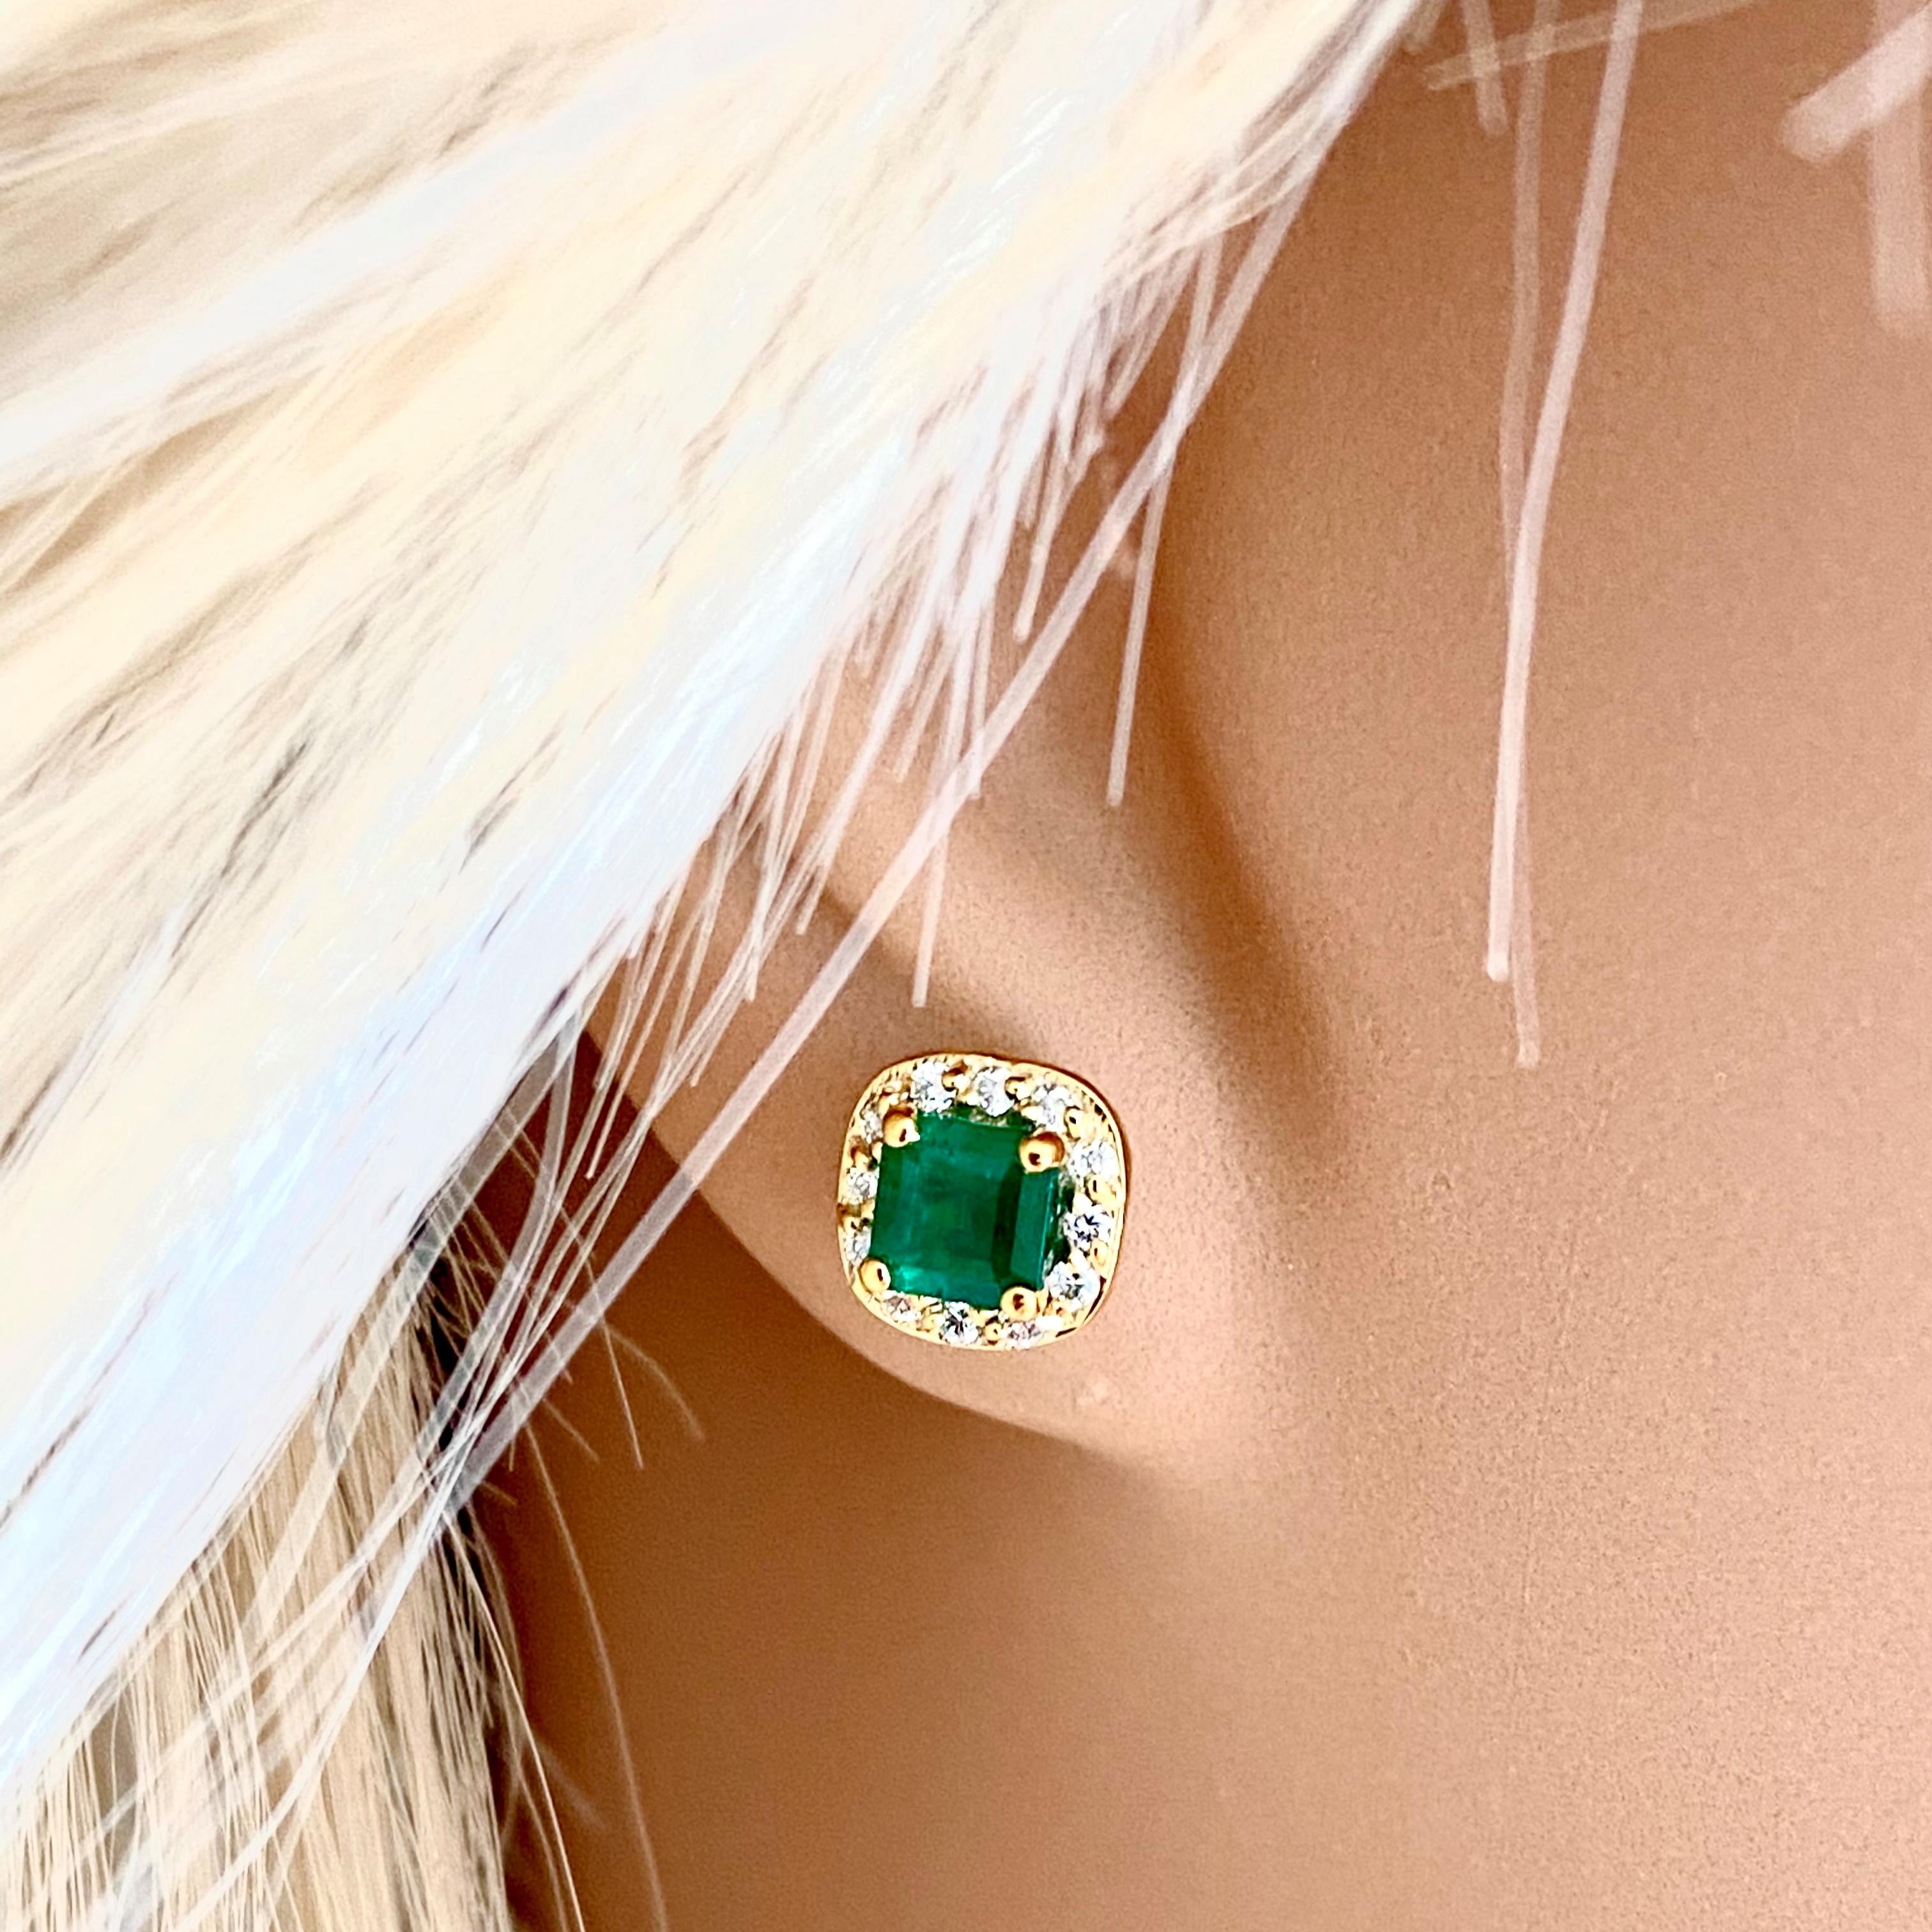 Introducing our exquisite Colombian Emerald Diamond Halo Earrings, a stunning fusion of timeless elegance and modern design. These earrings are perfect for elevating your style and making a statement at any occasion.
Gemstone Details:
Gemstone Type: